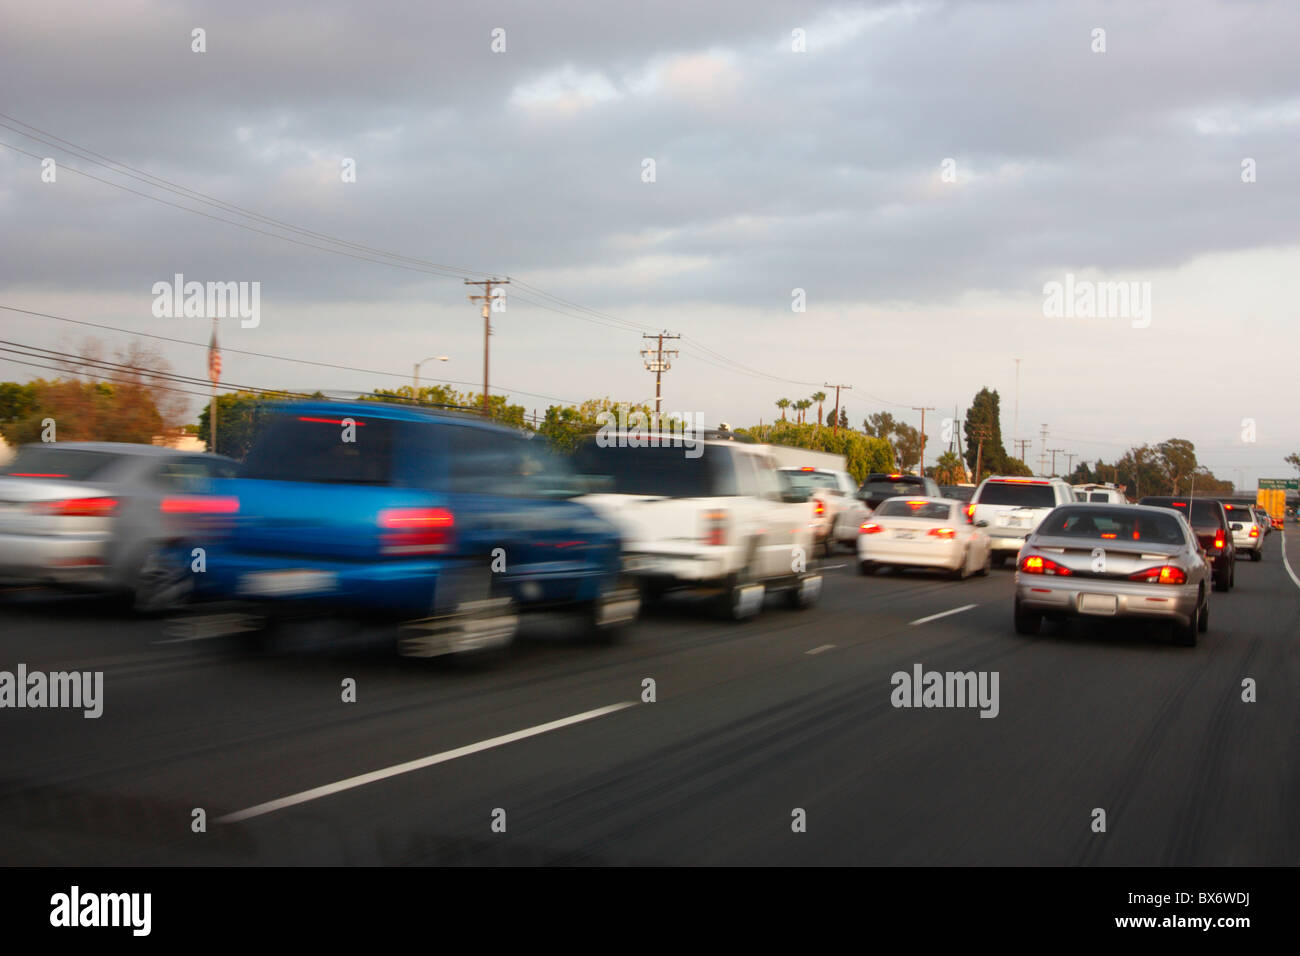 A car accident about to happen on a freeway. Los Angeles, California, U.S.A. Stock Photo